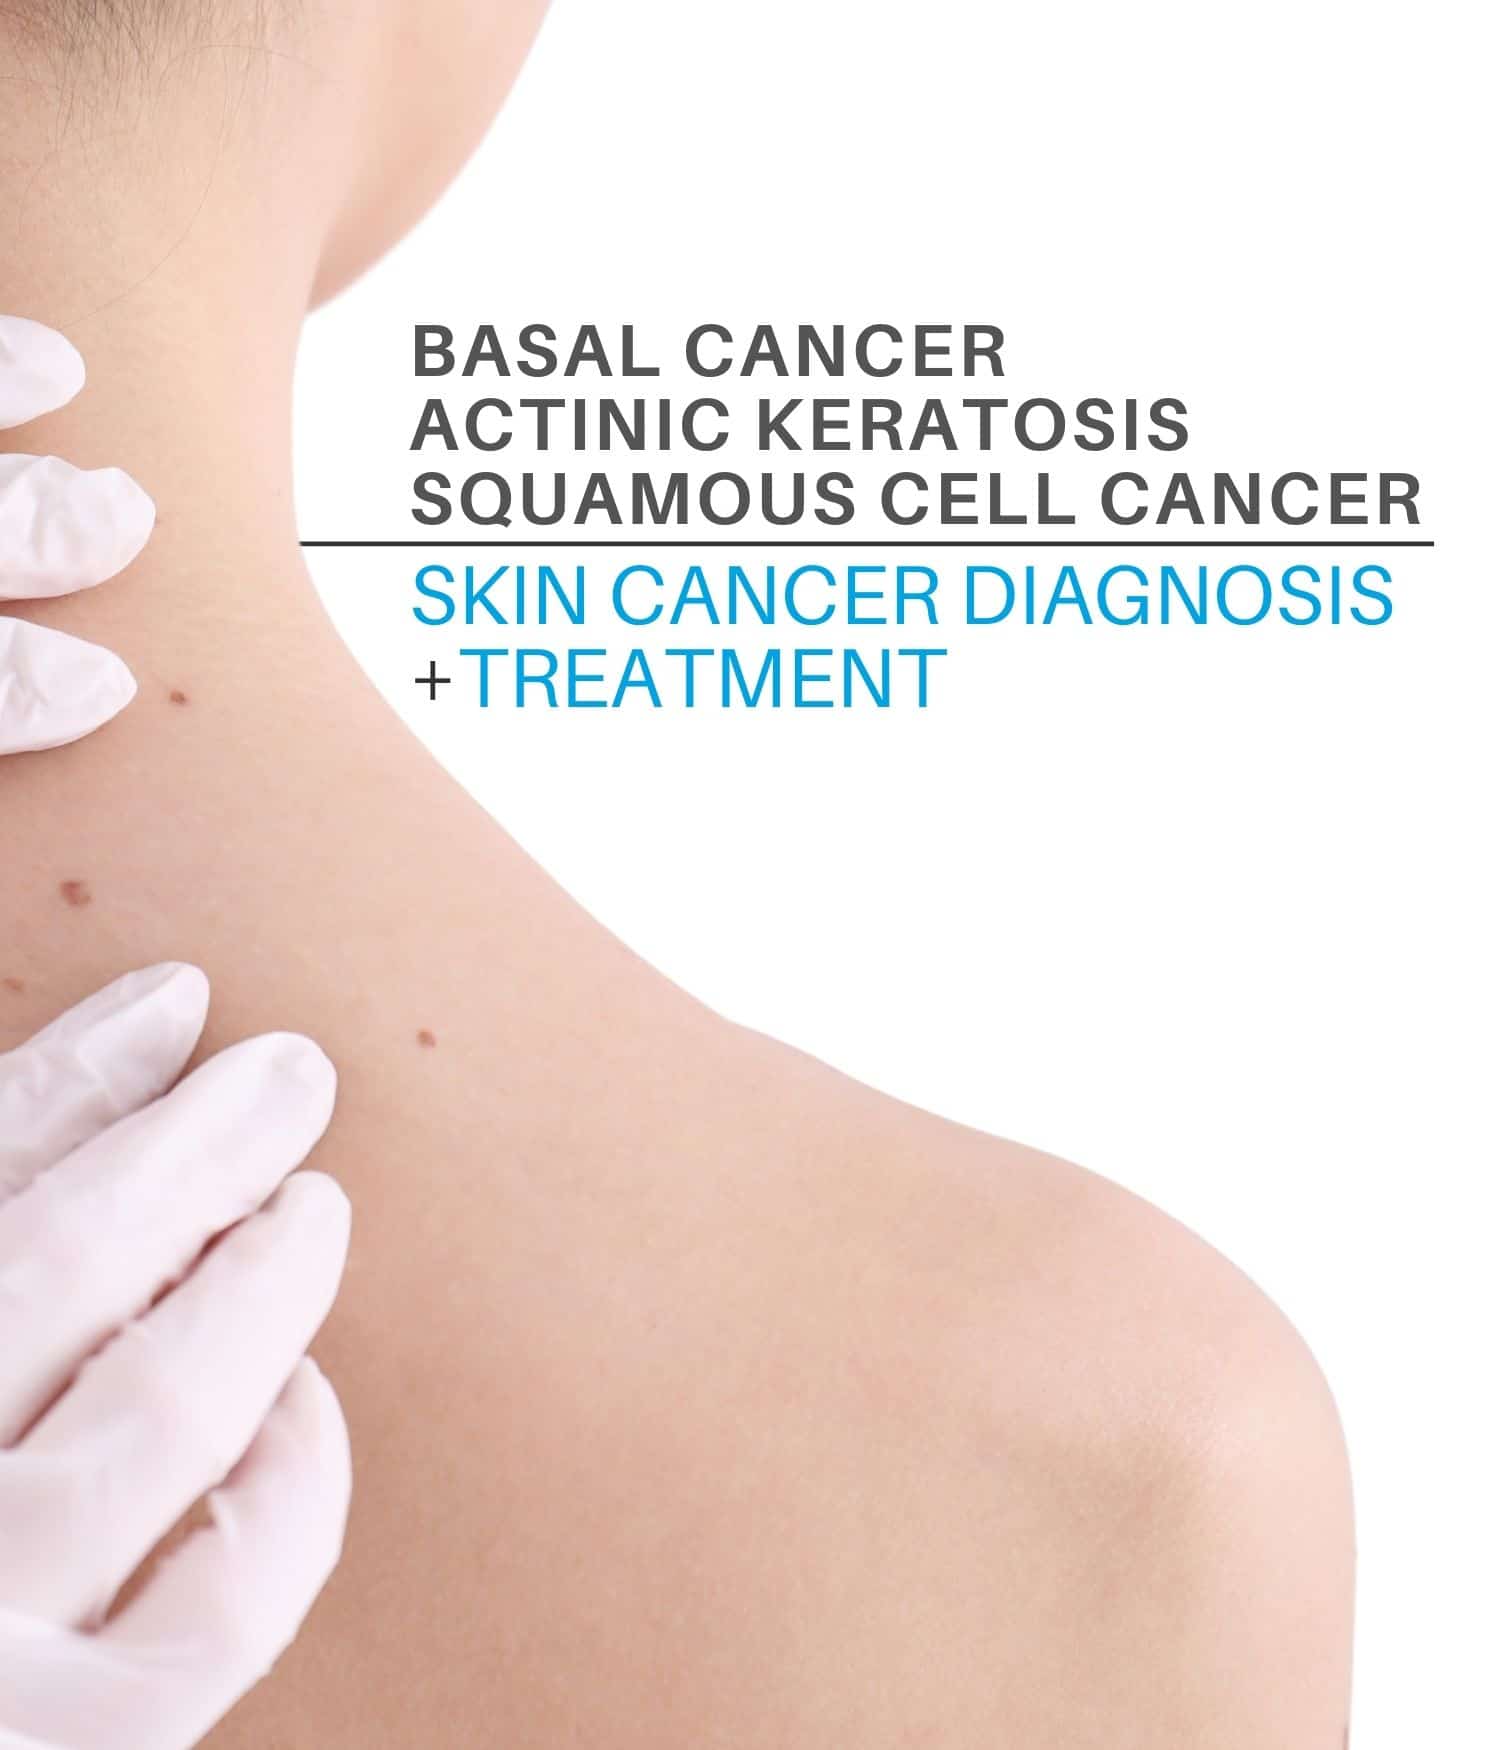 Basal Cell Cancer, Squamous Cell Cancer, Actinic Keratosis.